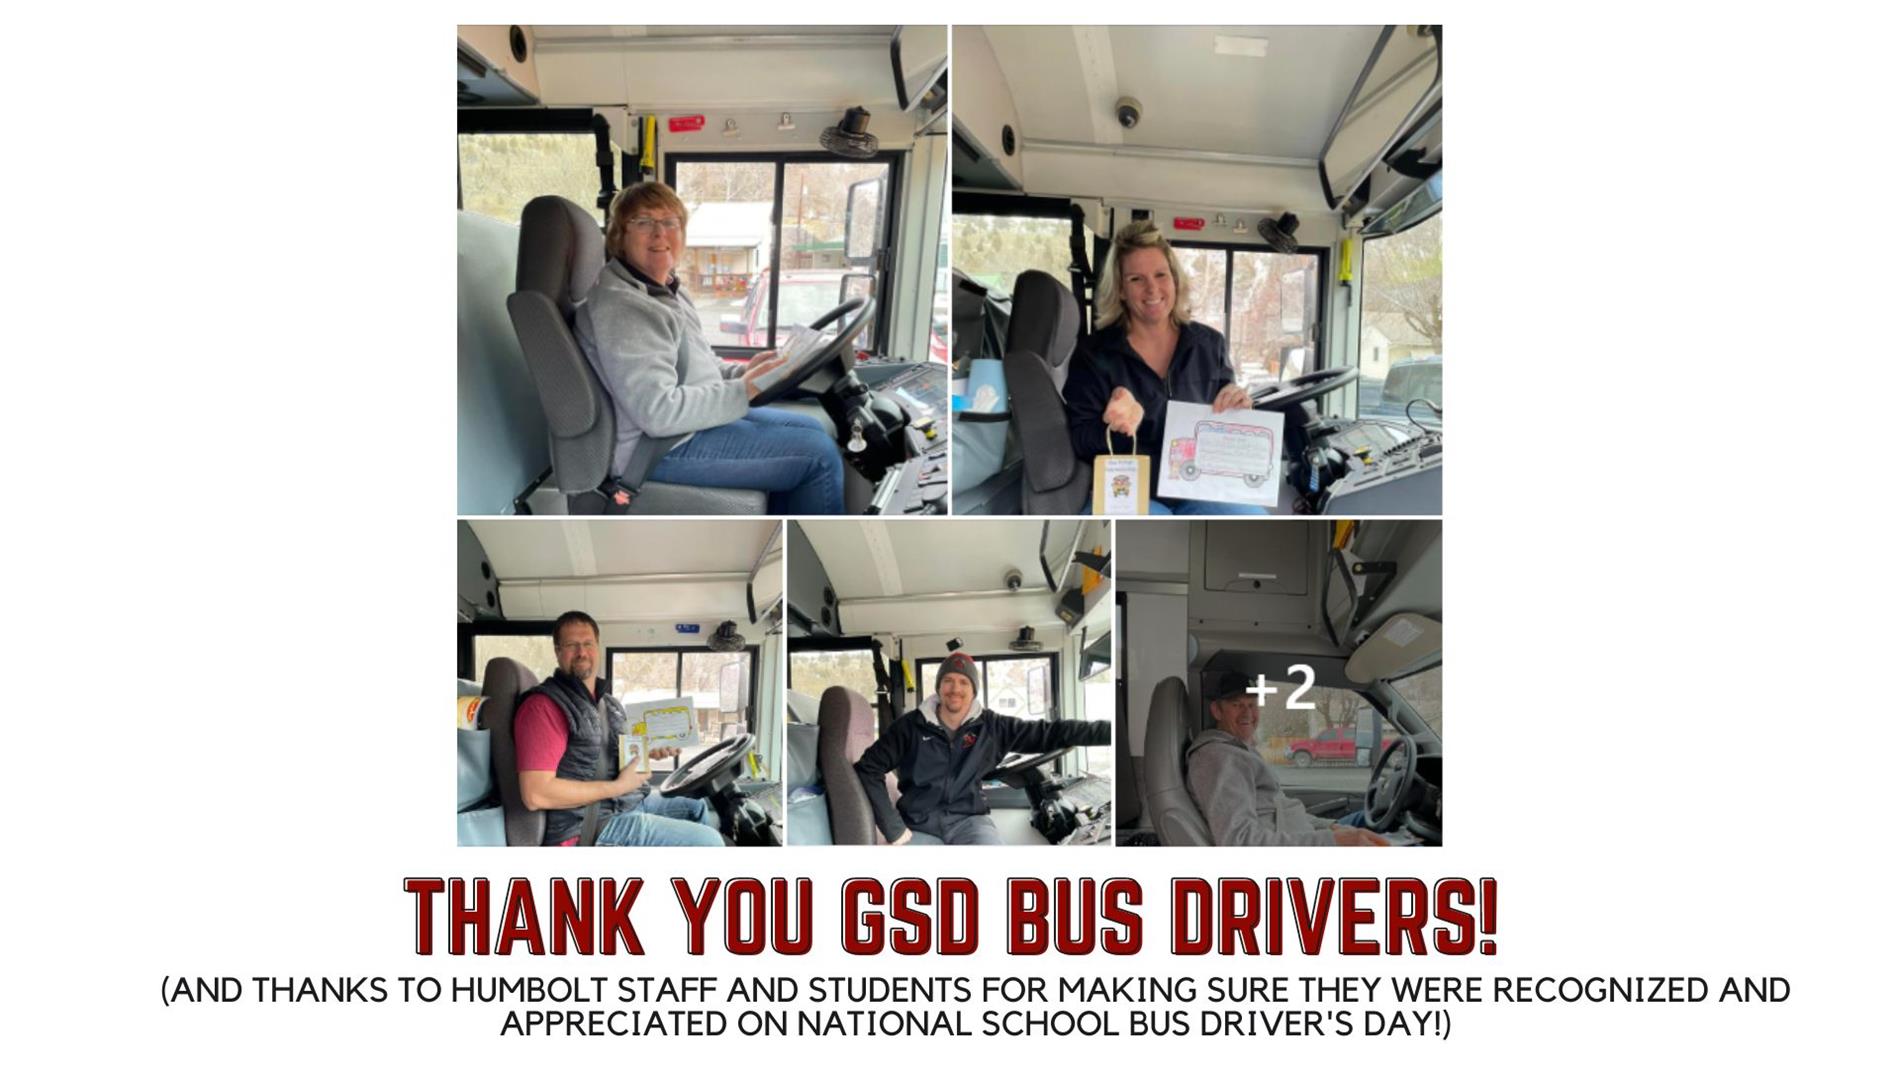 "Thank you Bus Drivers" post from Humbolt Facebook